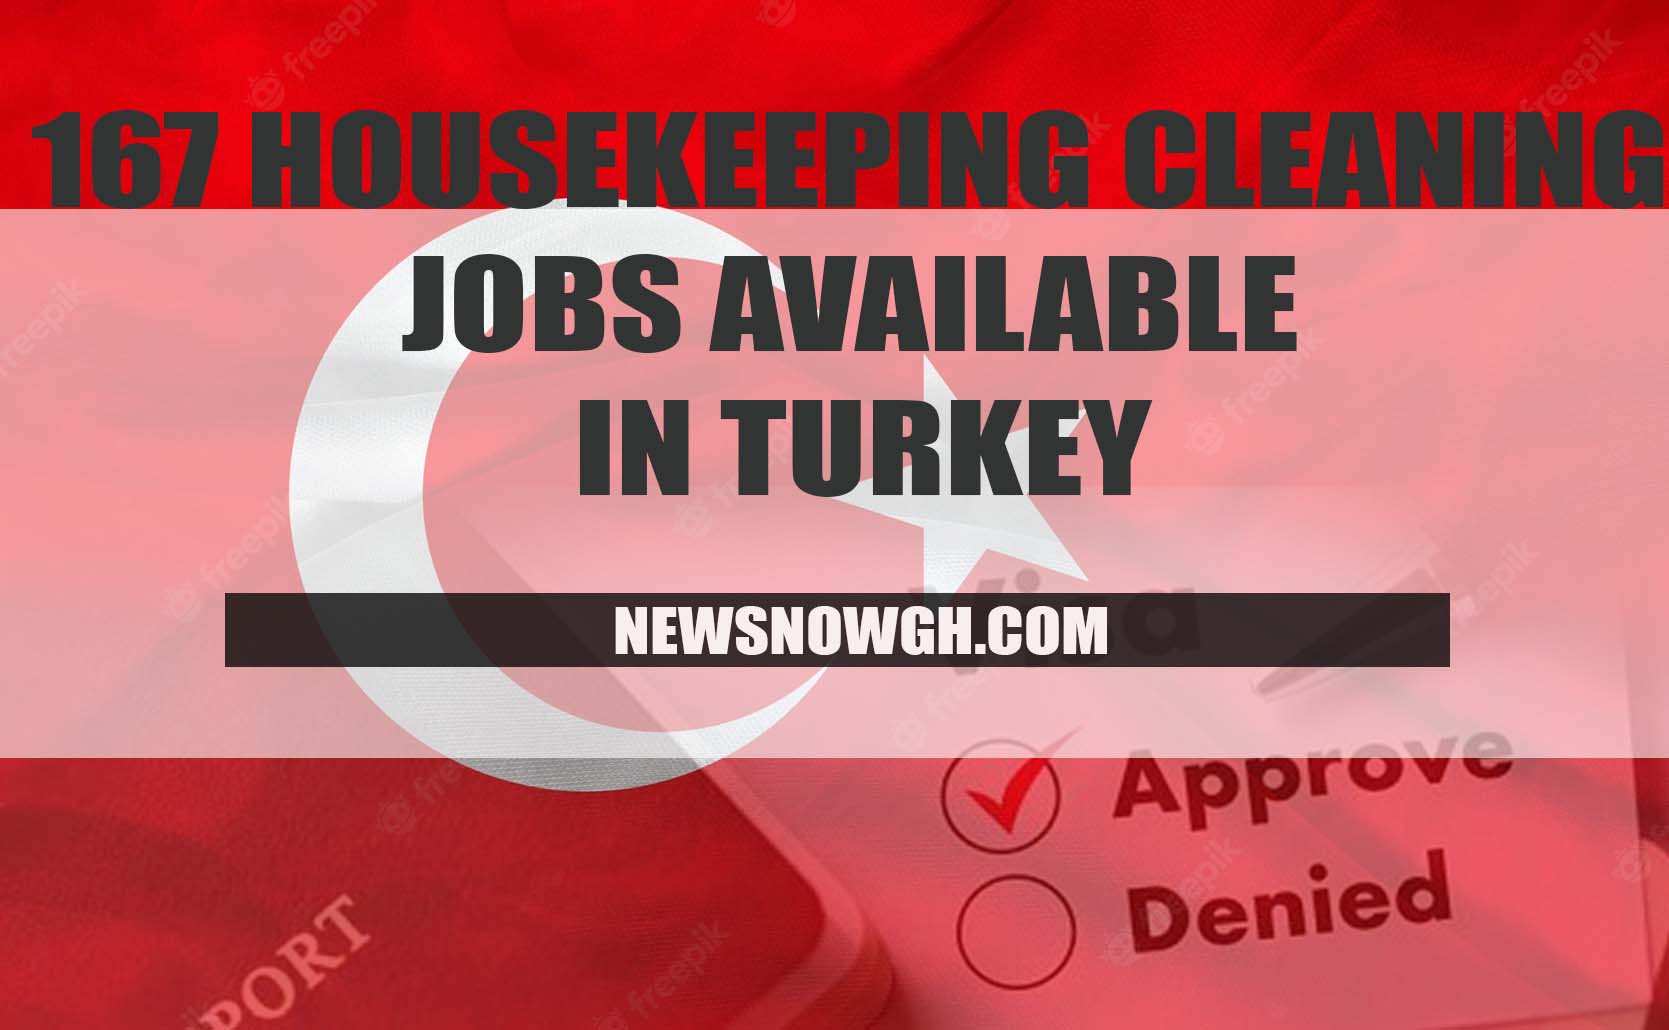 CLEANING JOBS AVAILABLE IN TURKEY